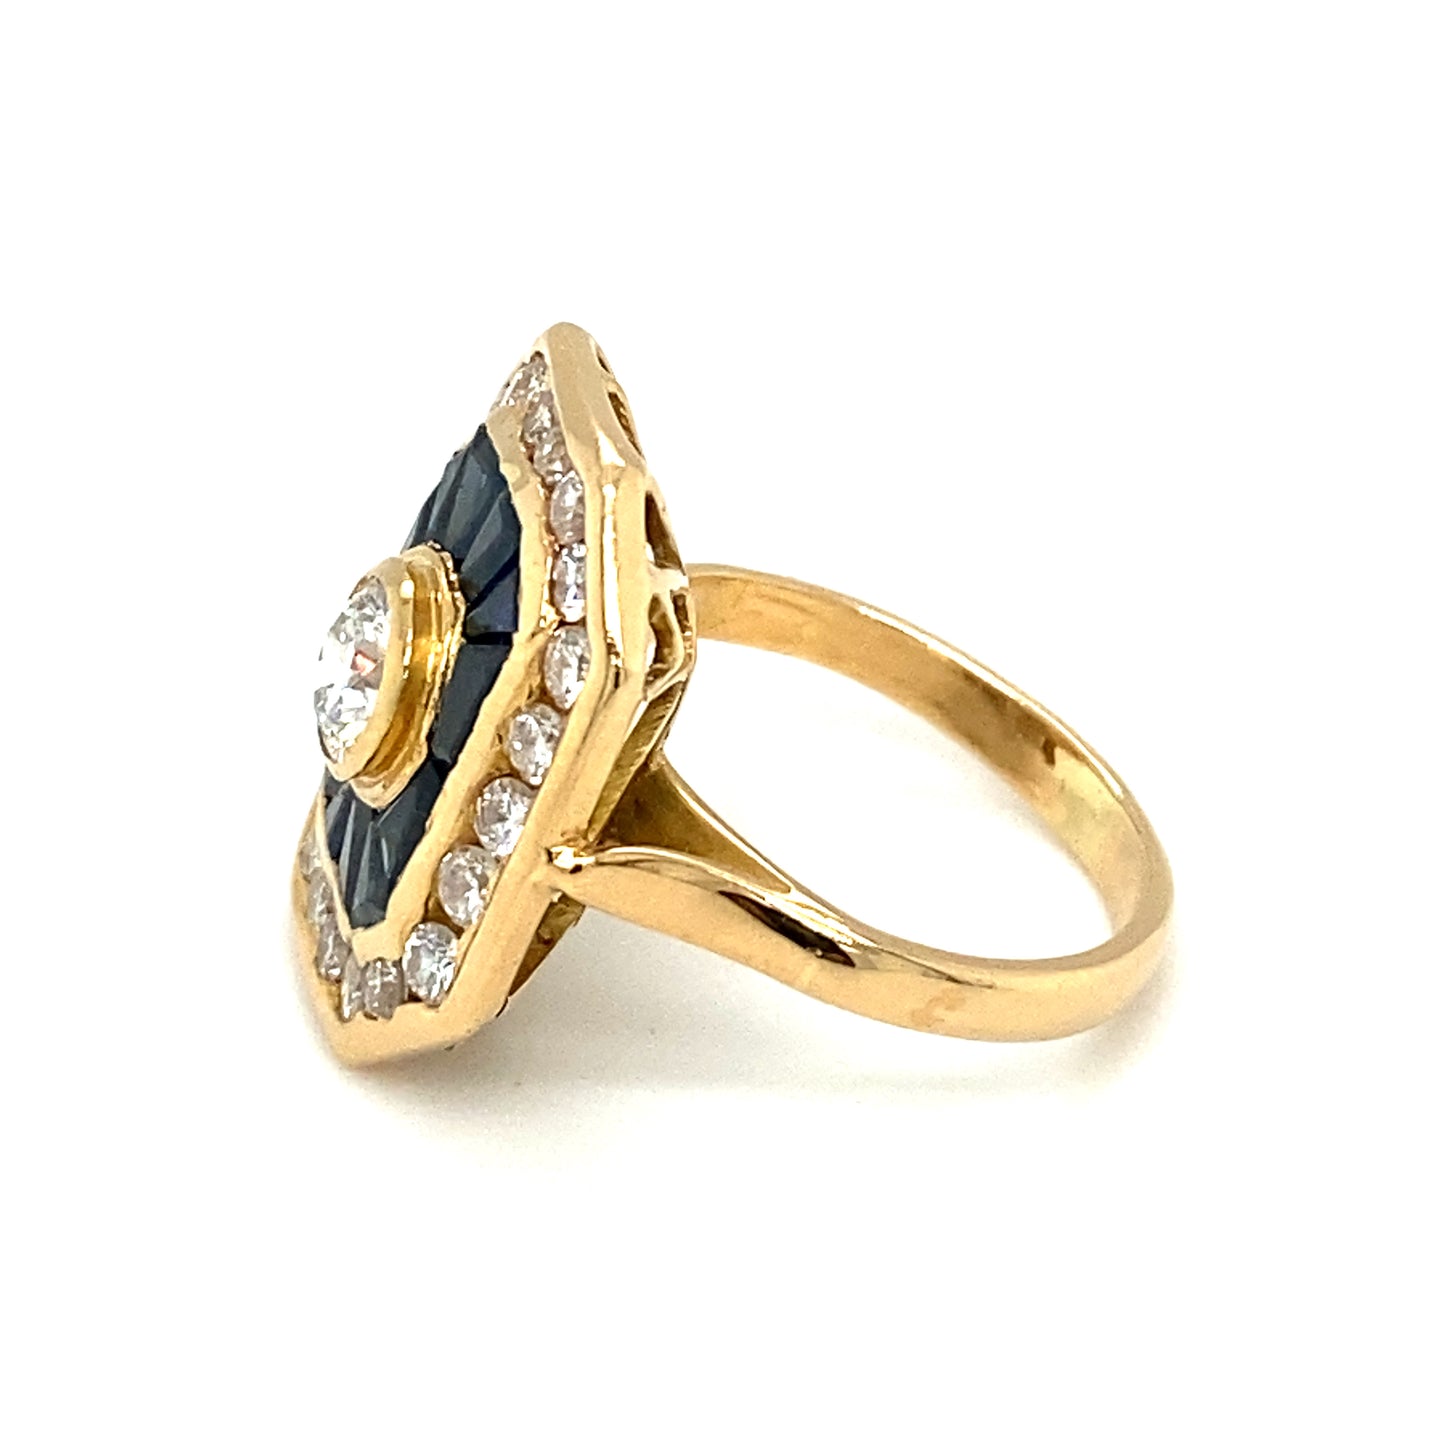 Circa 2000s Sapphire and Diamond Target Ring in 18k Gold